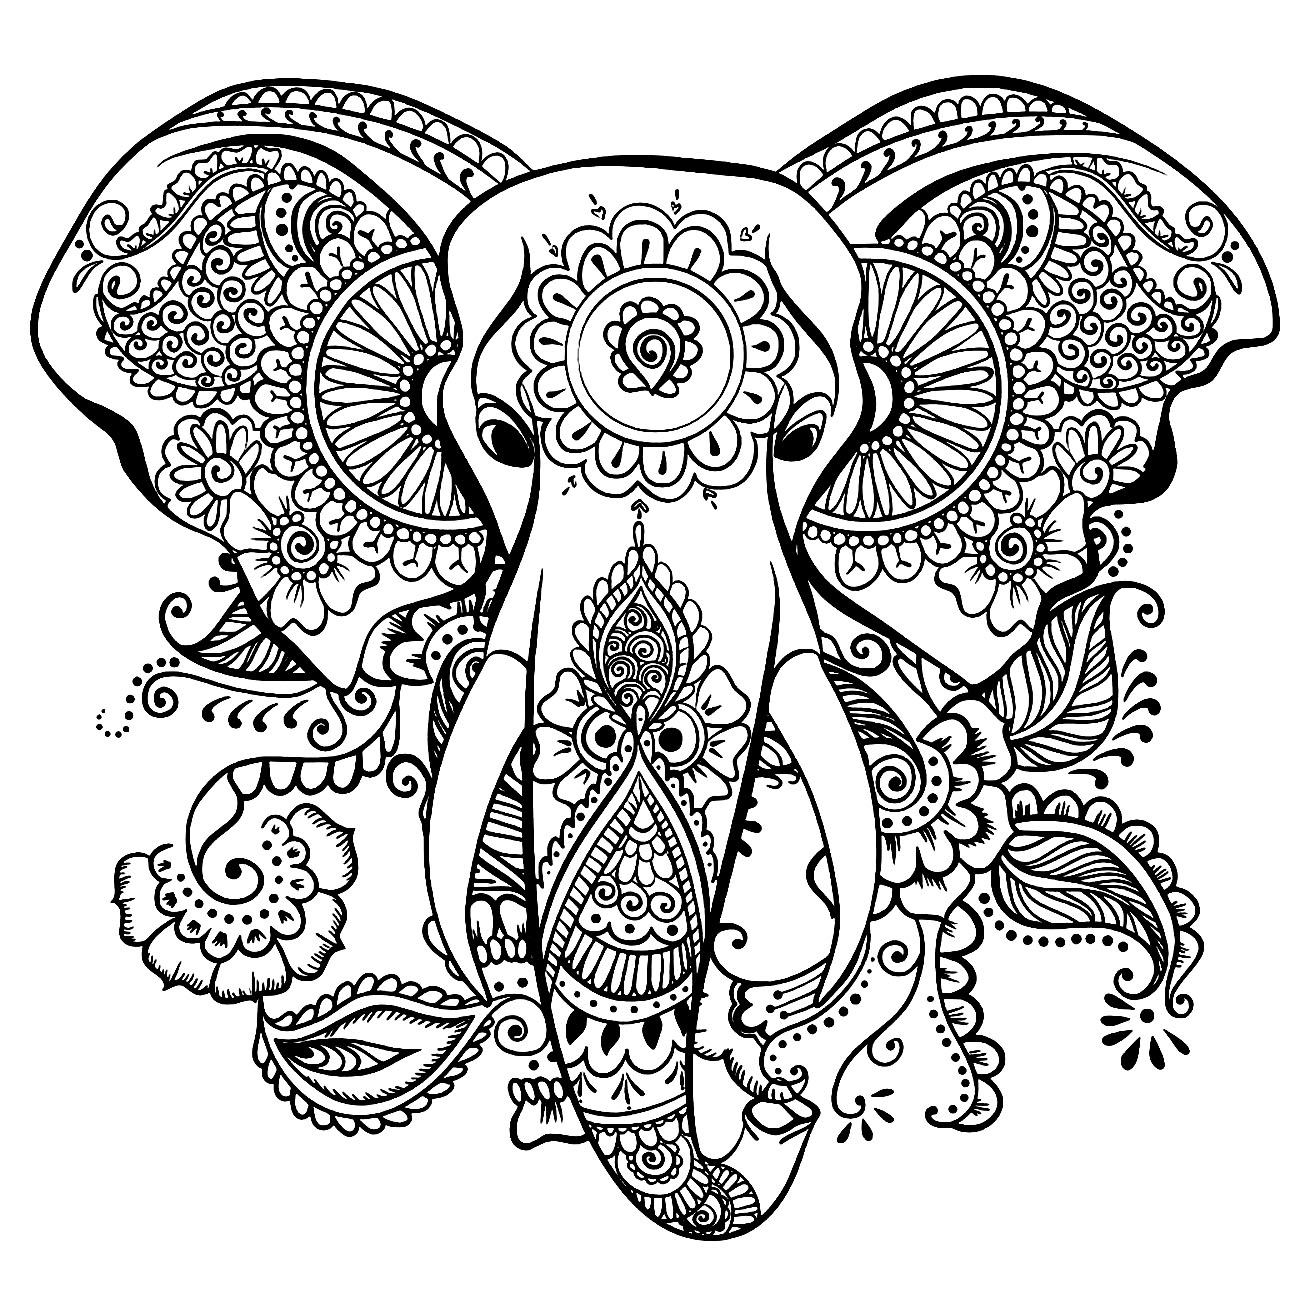 elephant coloring pages for preschool